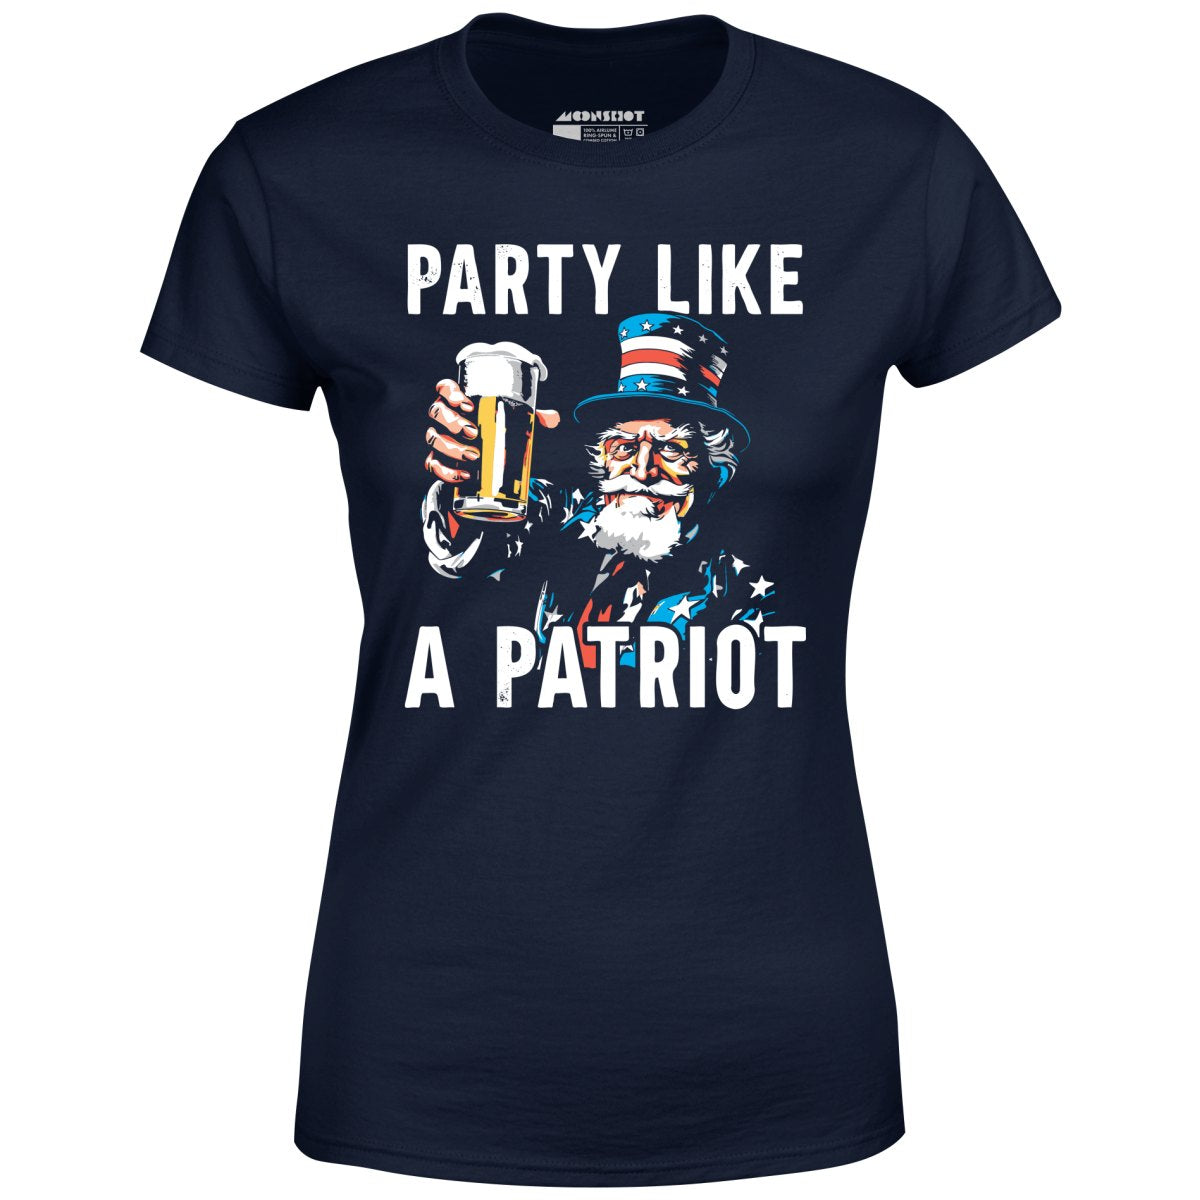 Party Like a Patriot - Women's T-Shirt